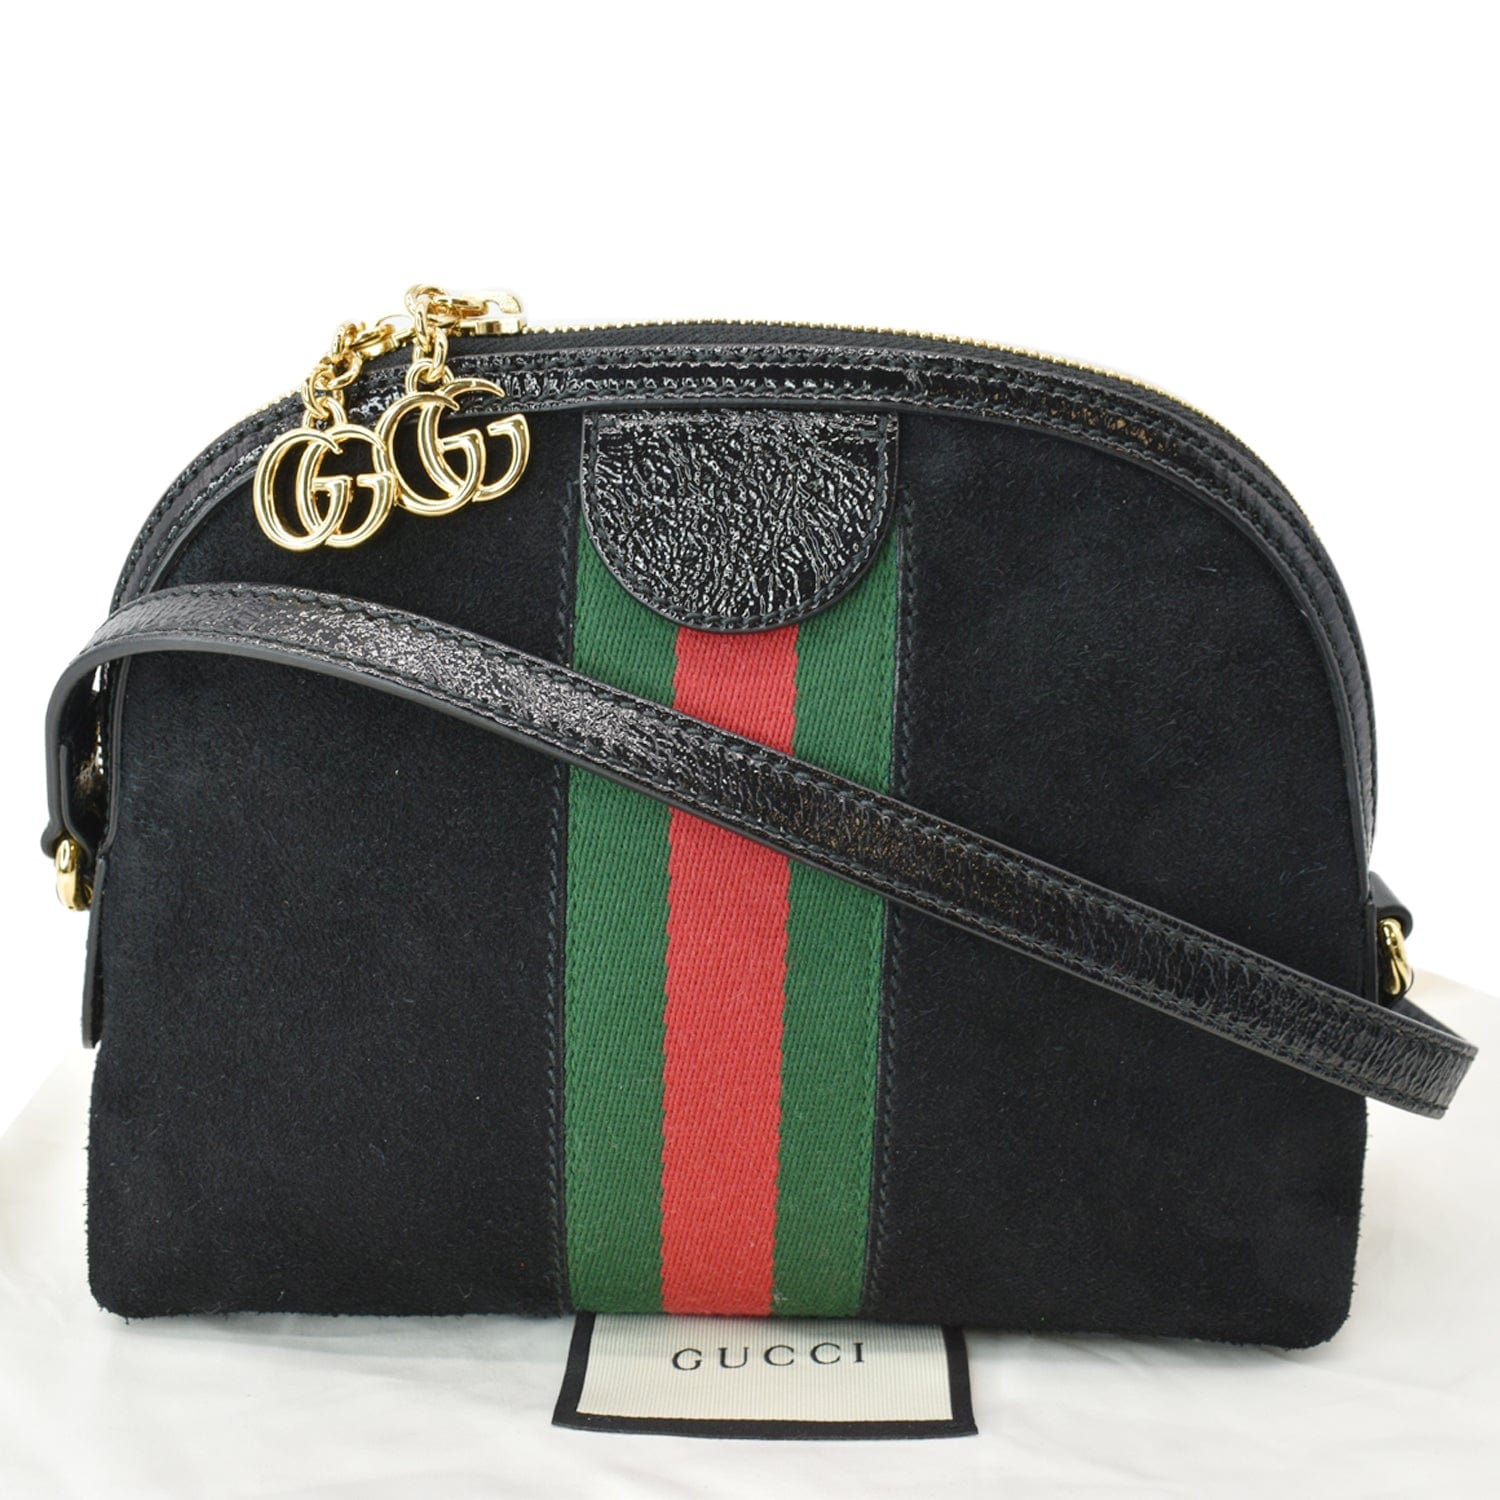 GUCCI Ophidia Small Suede Black 499621 - 10% Off